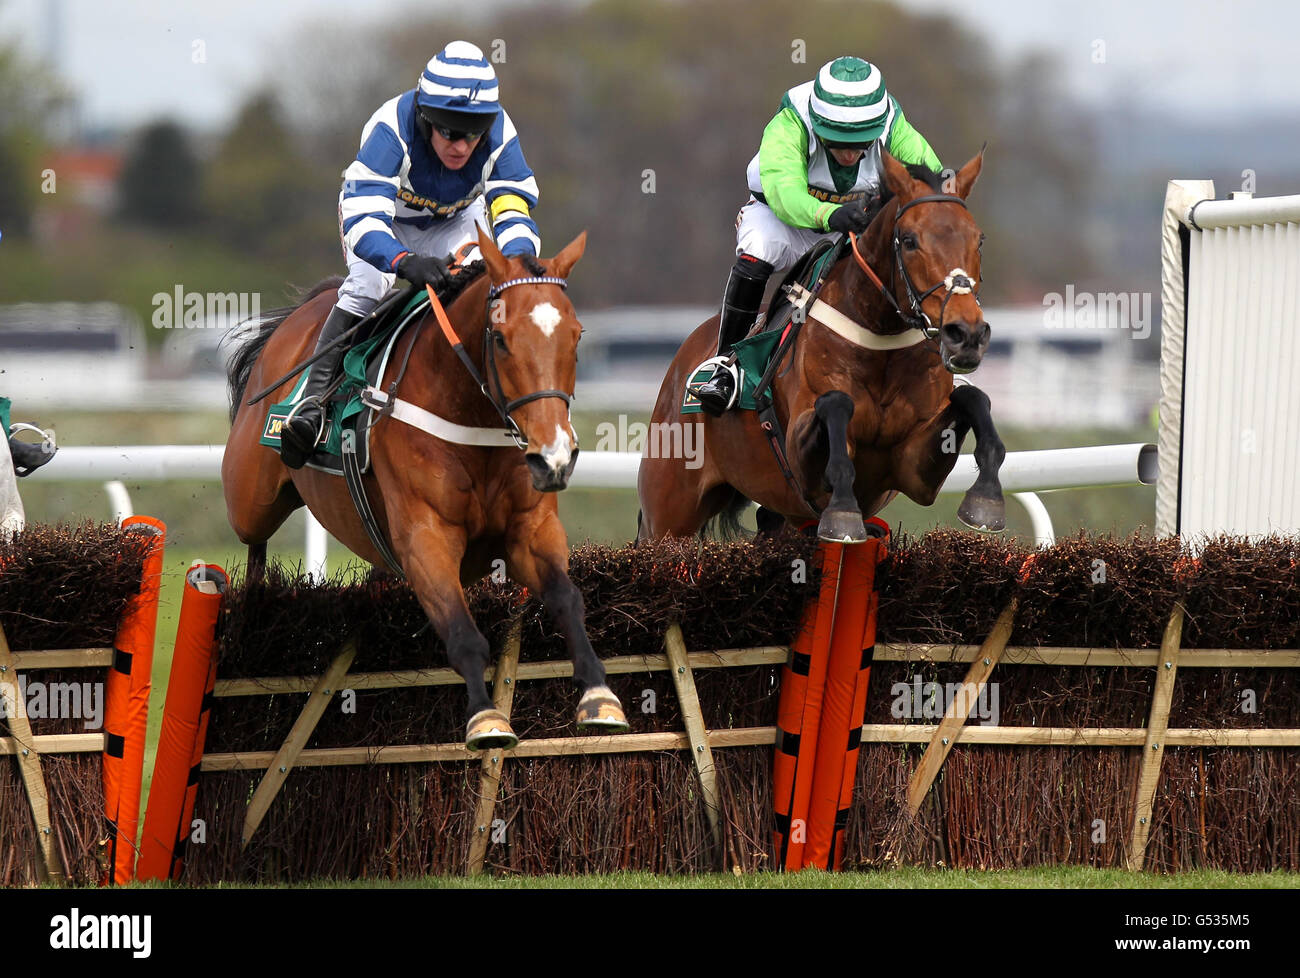 Eventual winner Oscar Whiskey ridden by Barry Geraghty (left) jumps the last from Rock on Ruby ridden by Noel Fehily (right) in the John Smith's Aintree Hurdle during day three of the 2012 John Smith's Grand National meeting at Aintree Racecourse, Liverpool. Stock Photo